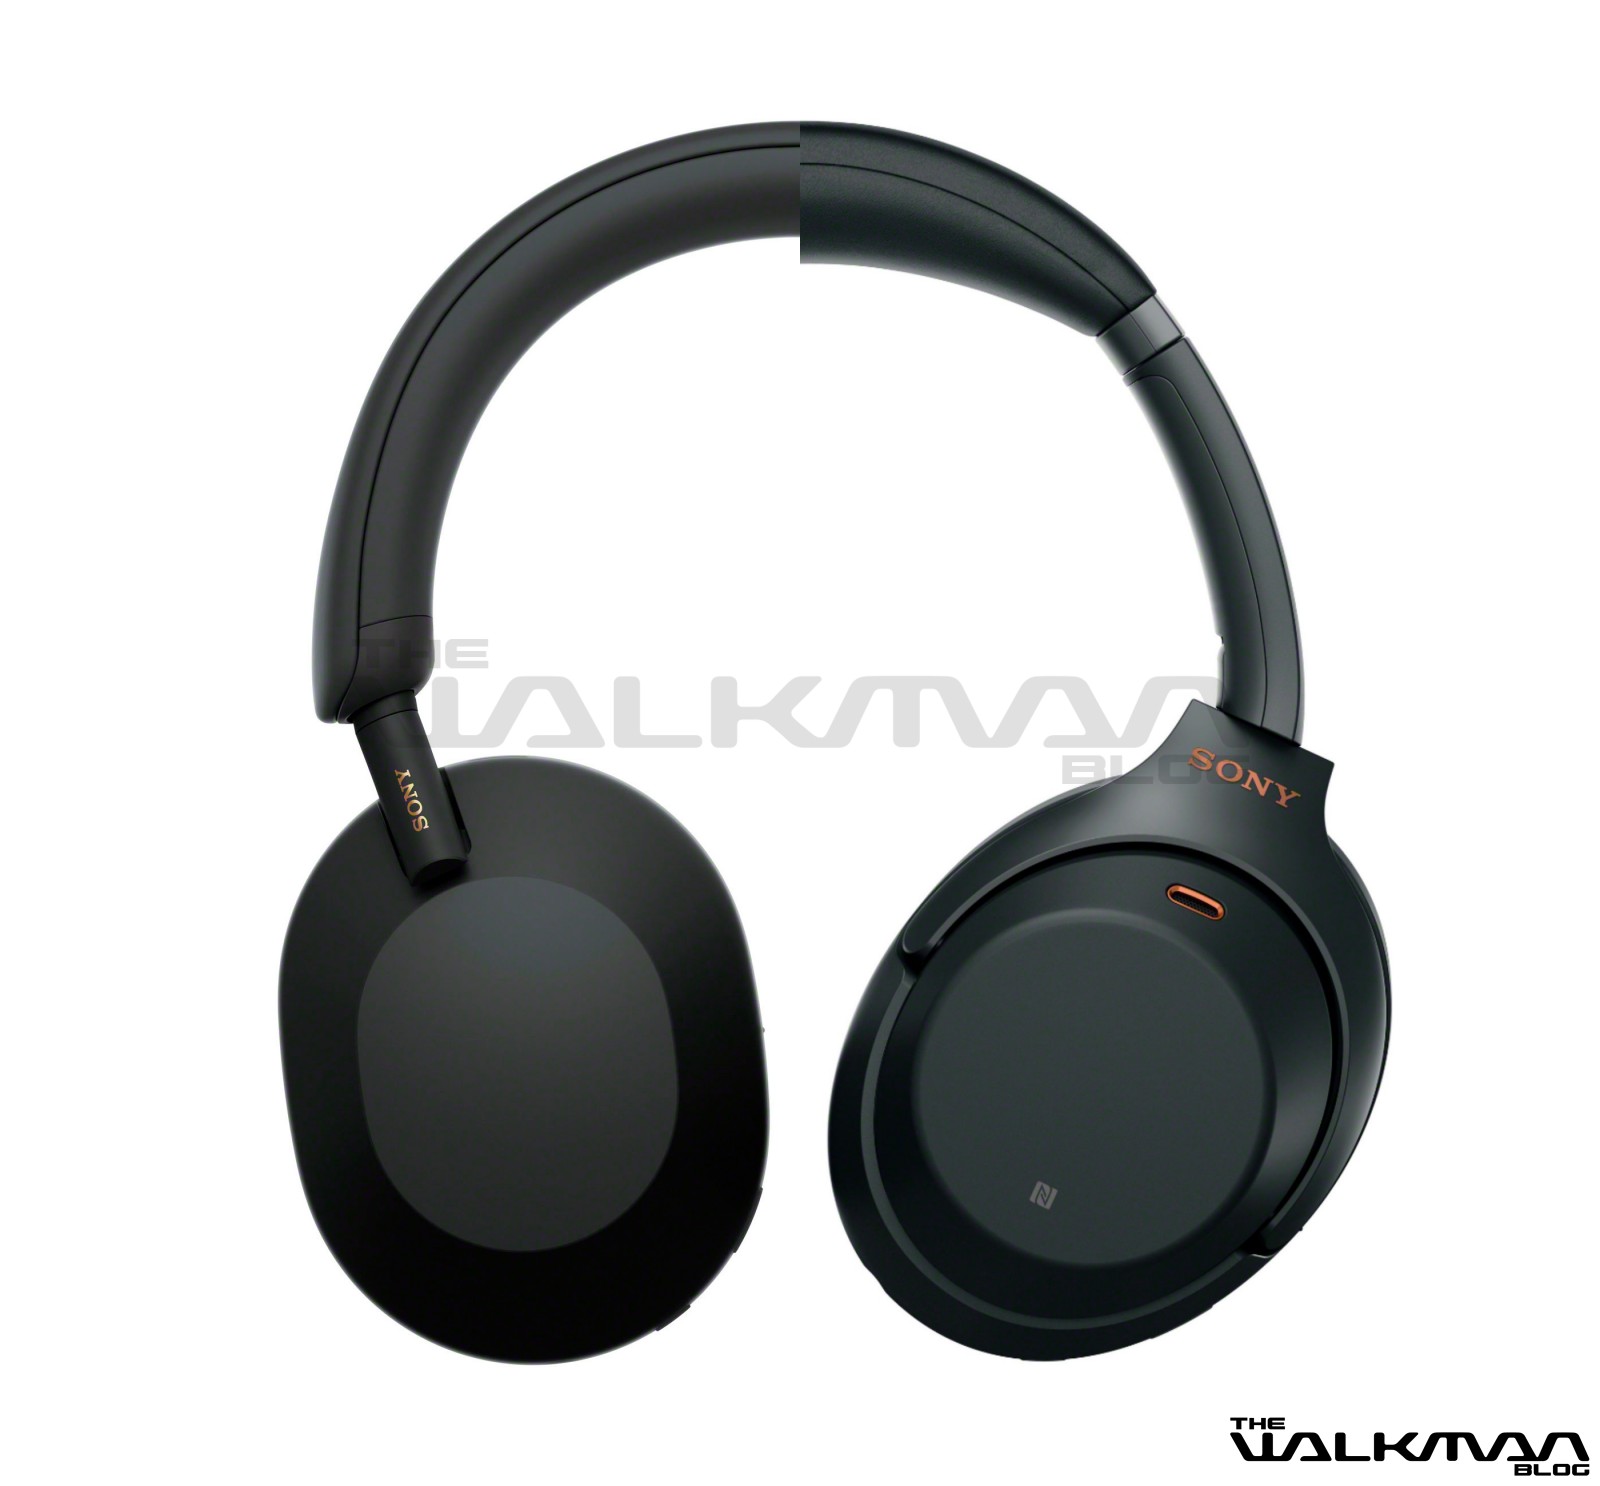 The Walkman Blog: Is the YY2954 the new Sony WH-1000XM5? (update)